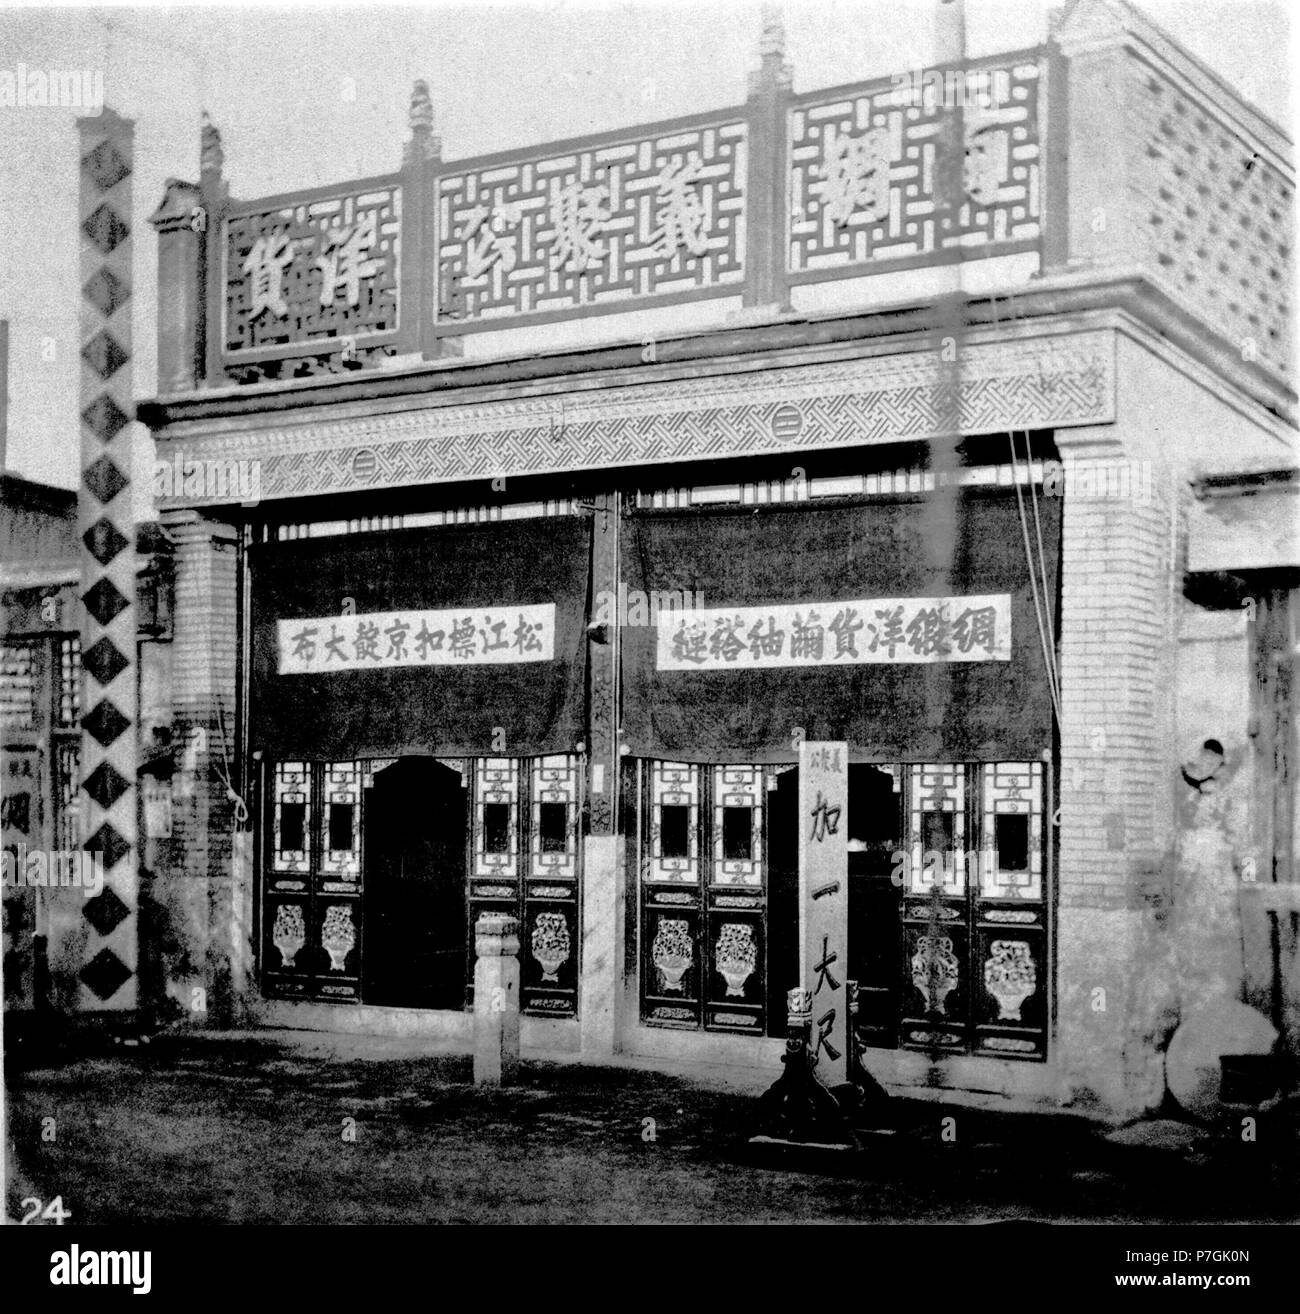 English: John Thomson: IN describing a Peking street, I purposely omitted the picturesque appearance of the shop fronts, of which No. 24 affords a very good type. There are many which are much more elaborate and imposing in appearance than this one, and many more which are 111 every respect inferior. The foundation and flooring of the shop are of granite, and the walls, to a height of about three feet, consist of the same material, while the upper portions of these latter are built of well-fired bricks. The shops of Peking differ in many respects from those in the cities of southern China. The Stock Photo